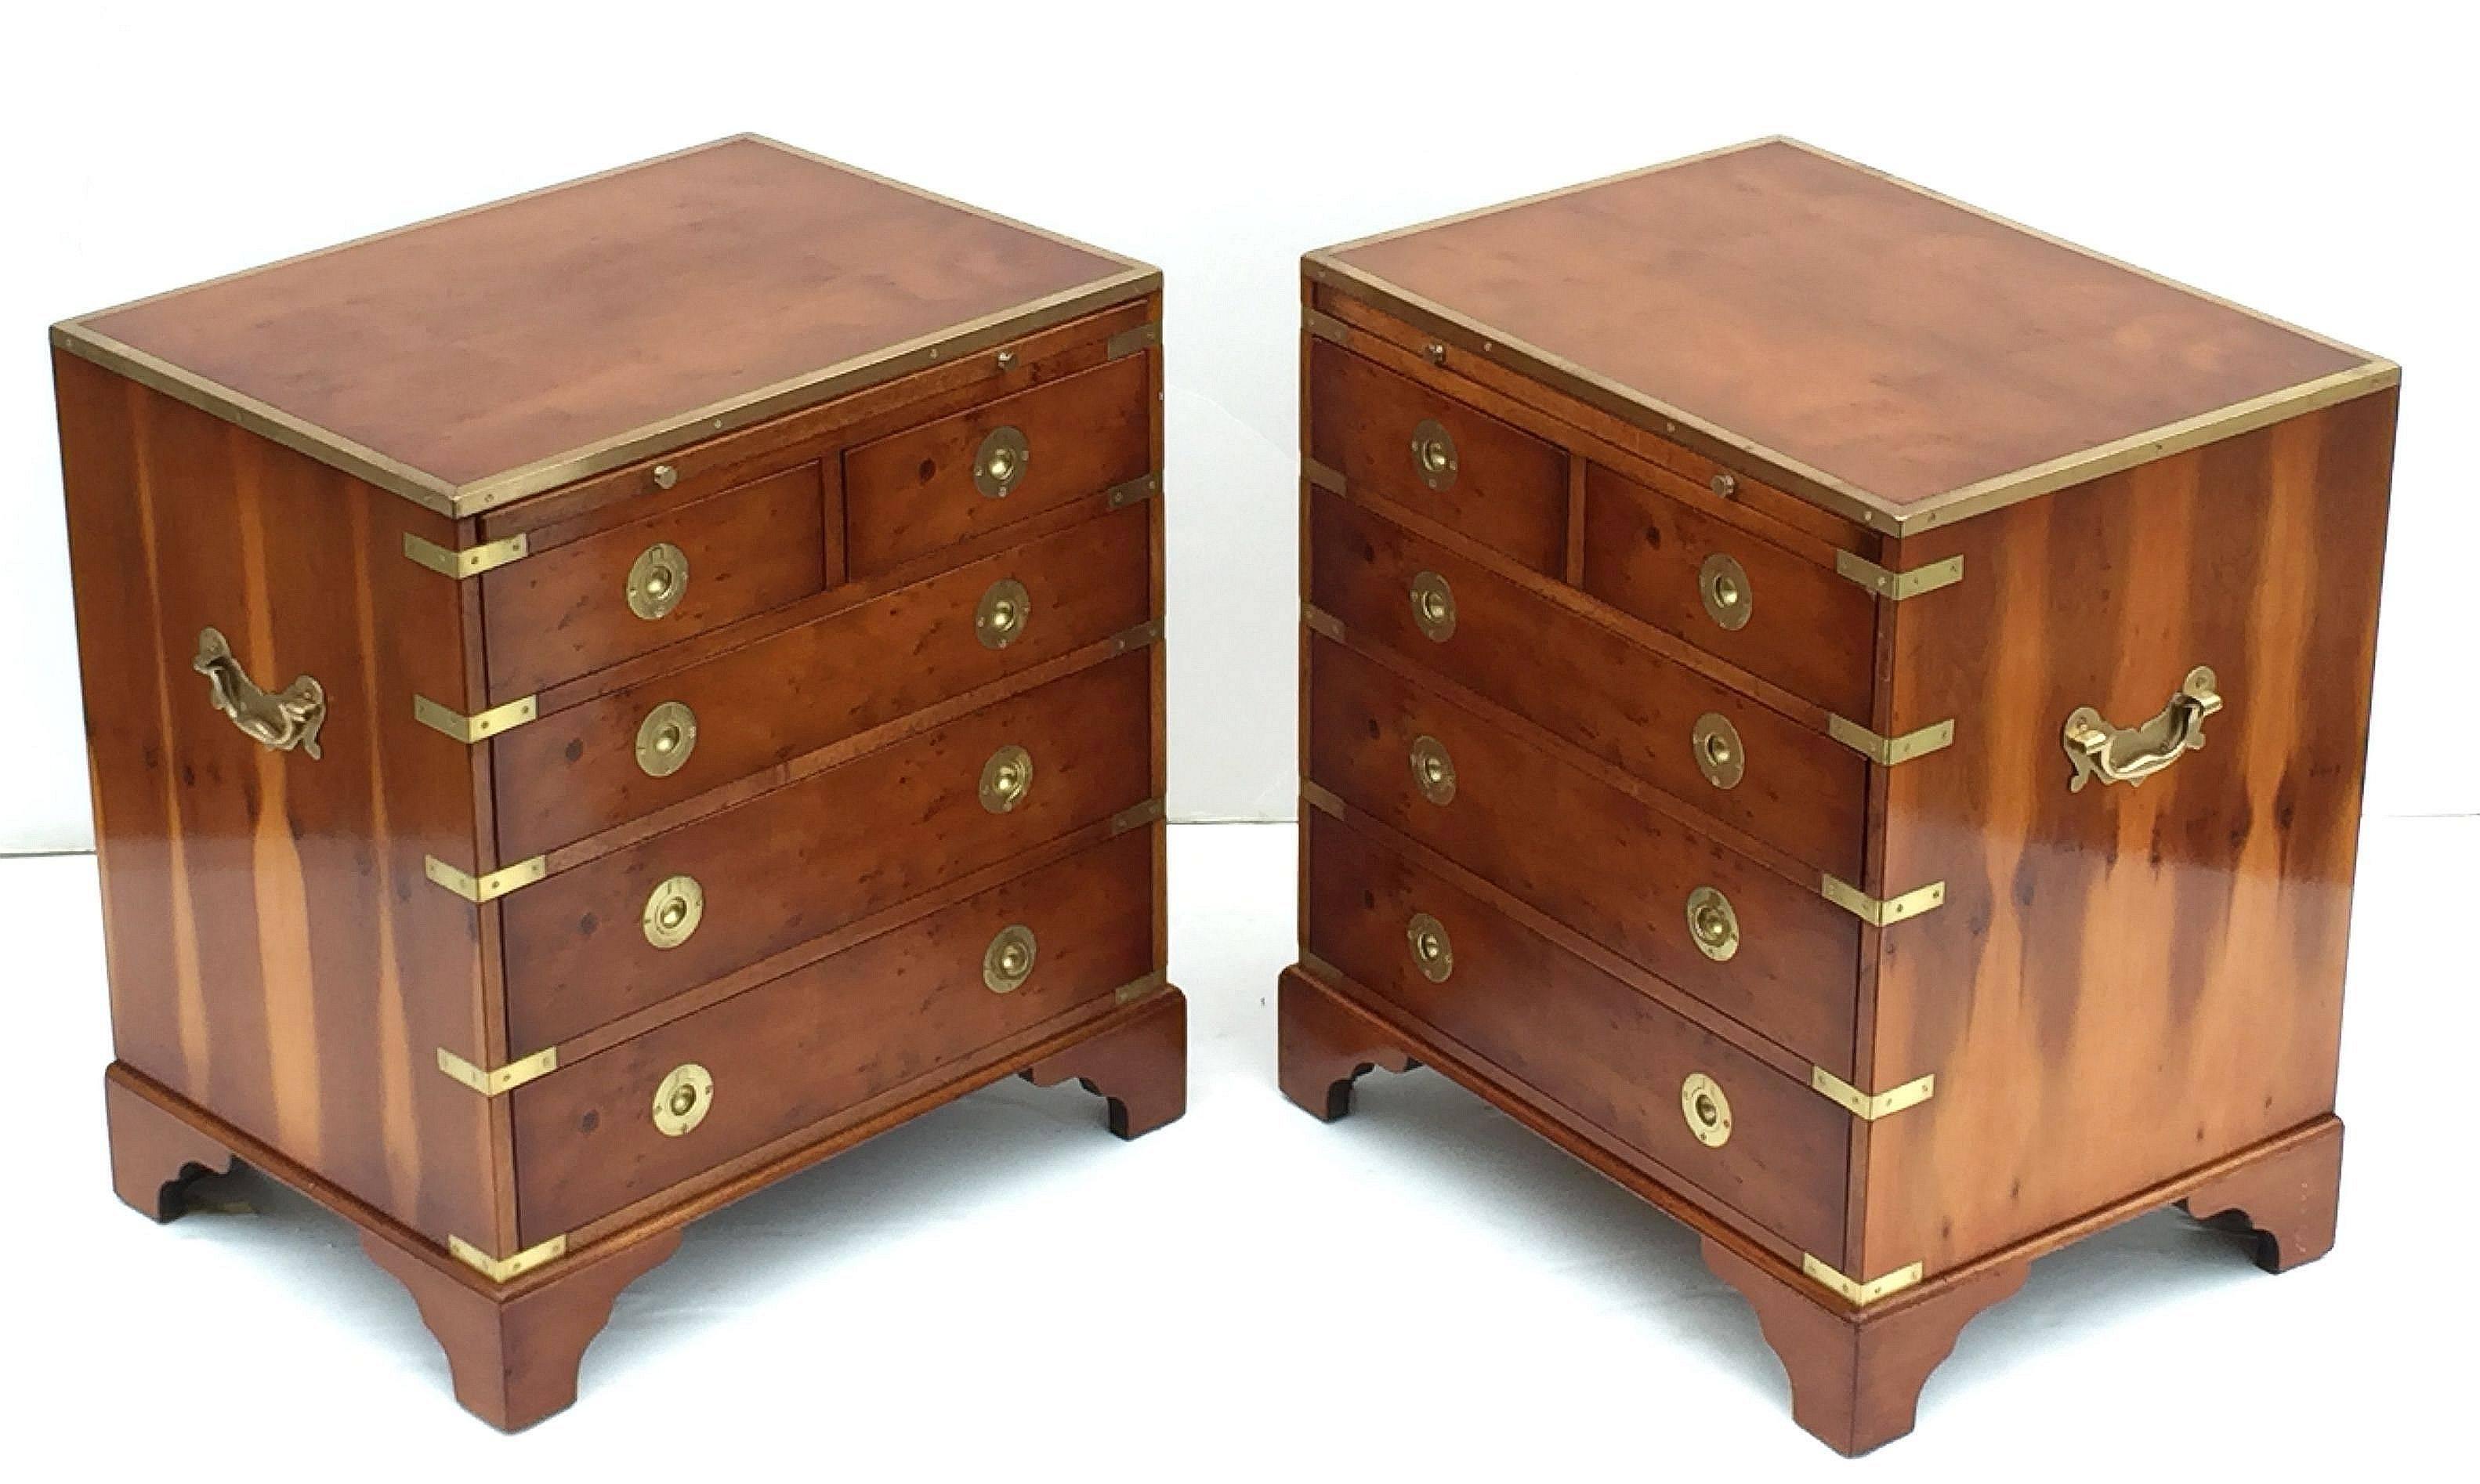 A fine pair of English nightstands or small side chests in the Campaign style, each chest featuring a brass-bound wood top and figured wood sides, with heavy brass hardware, the face with slide of embossed green leather, over two short drawers and